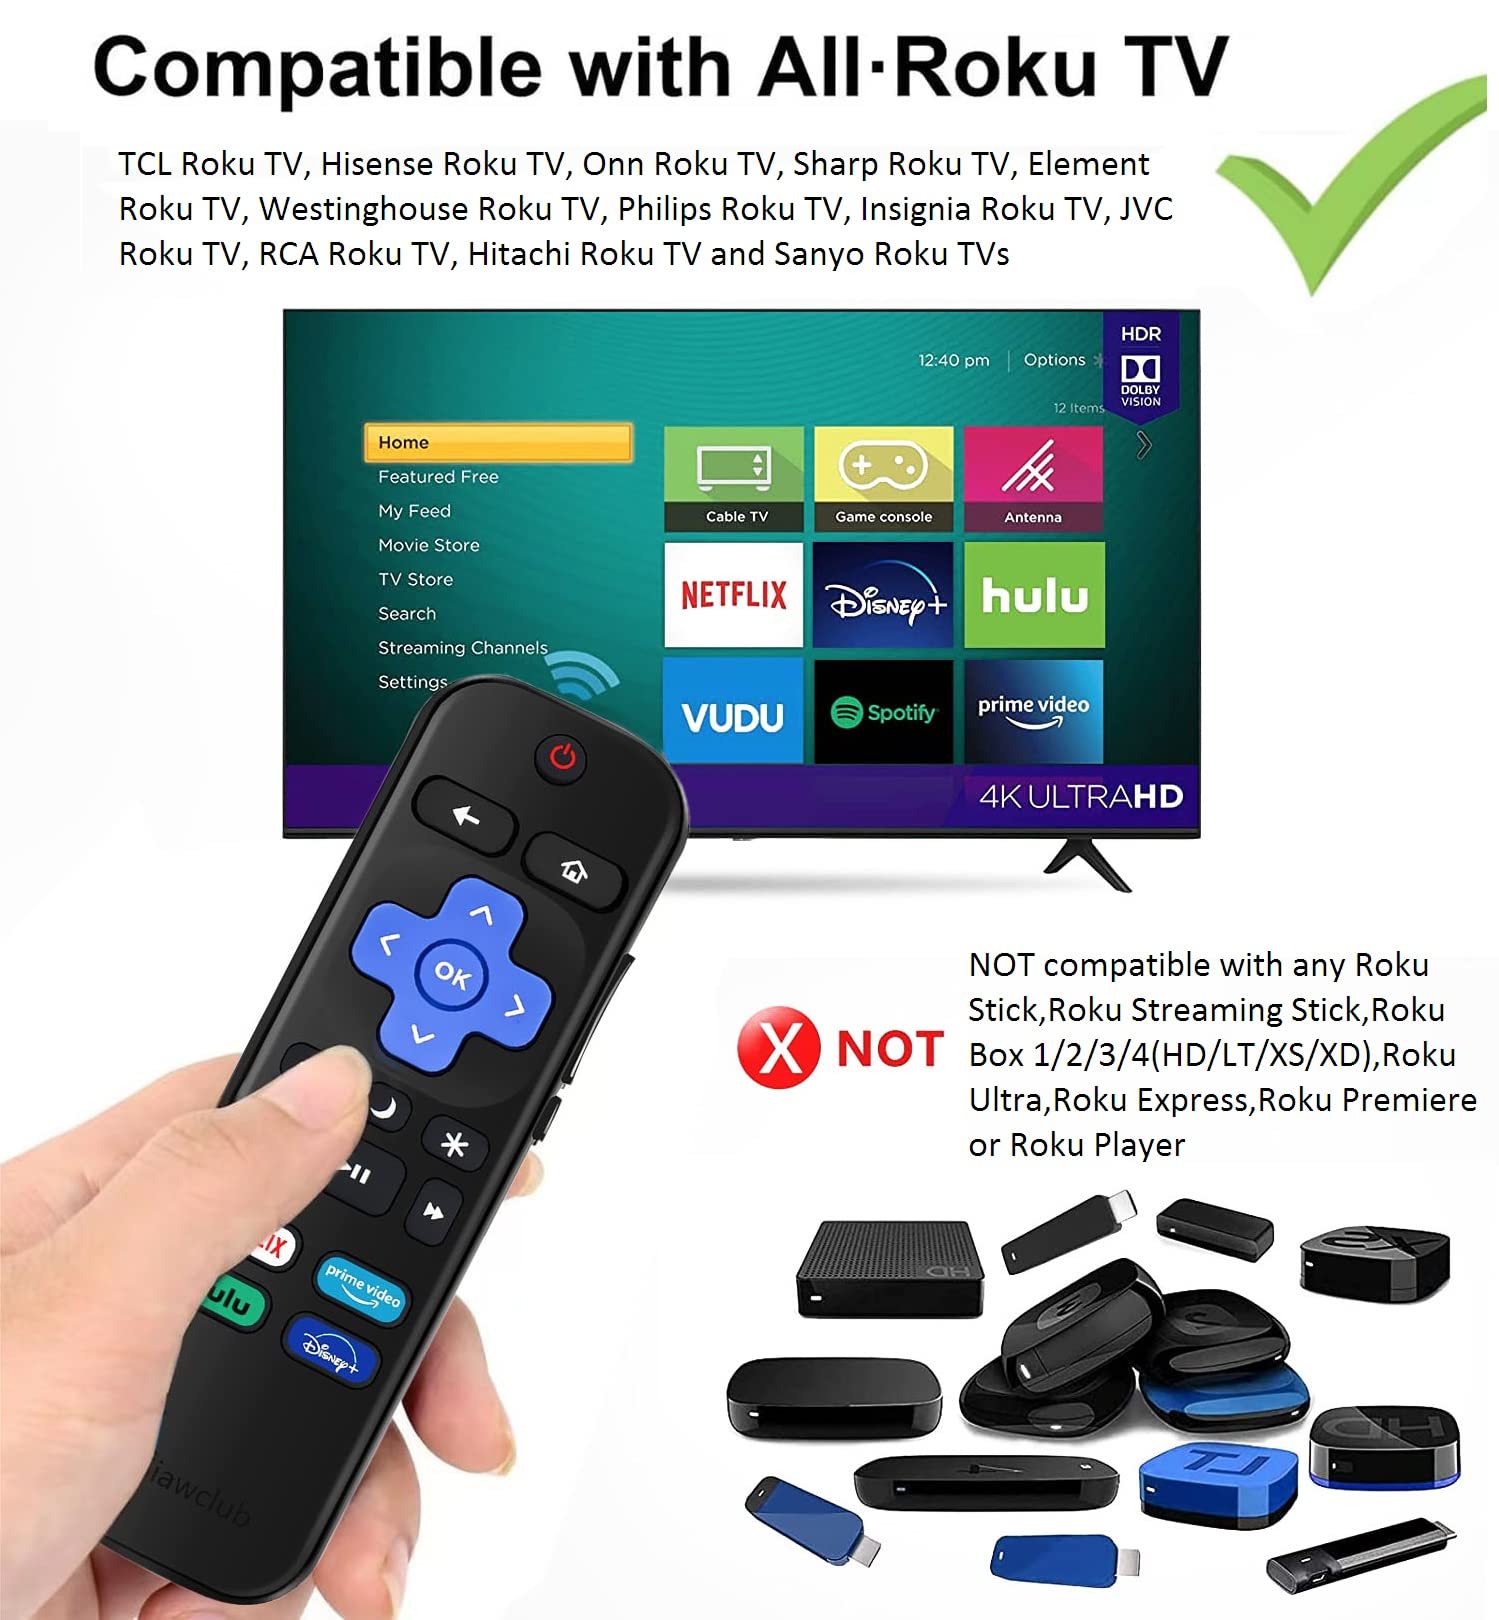 Remote Control for Roku TV 2 PCS, Siawclub Replacement Remote Compatible with Hisense Sharp Onn Insignia Roku ect,with Netflix, Disney+, Hulu, Prime Video Buttons【Not for Roku Stick and Box】